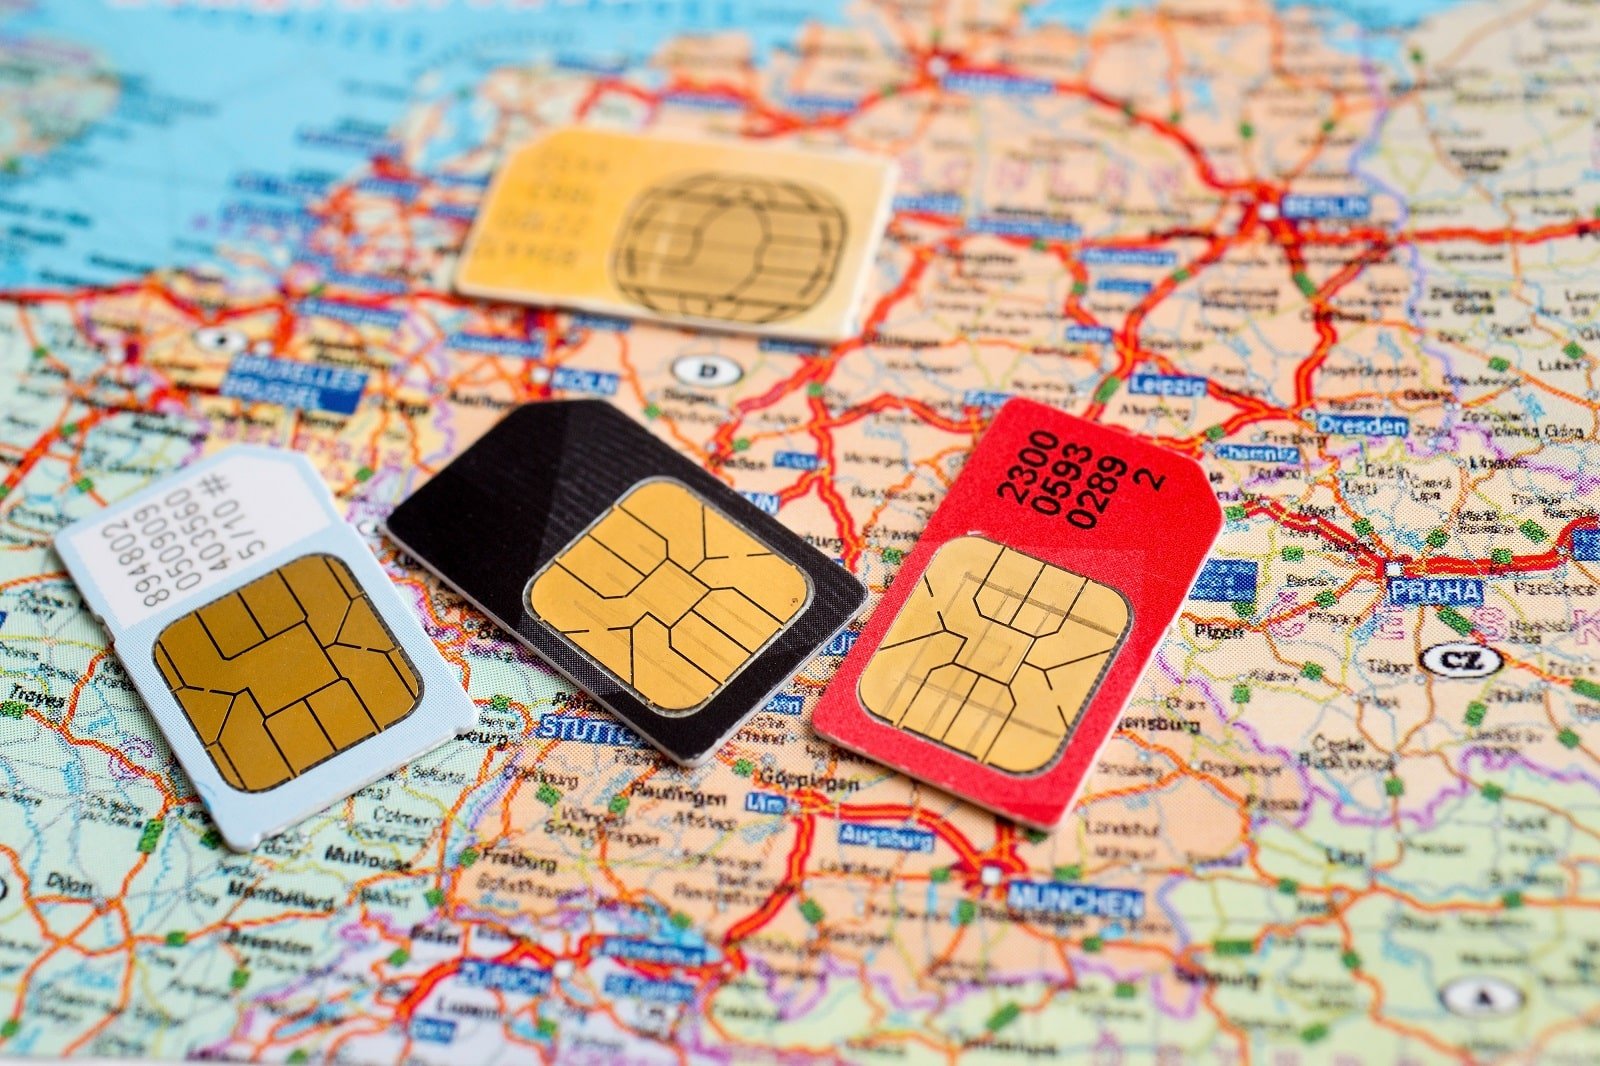 <p><span>Different SIM cards offer varying coverage depending on the region. Some are tailored for specific areas like Europe or Asia, while others offer more global coverage. Ensure that the SIM card you choose offers extensive coverage for the countries you plan to visit.</span></p> <p><span>Data Plans: Depending on your data usage, look for plans that suit your needs. If you rely heavily on data for GPS navigation, social media, emails, or streaming, opt for a SIM card with a generous data allowance. Some providers offer unlimited data plans, which can be beneficial for heavy users.</span></p>